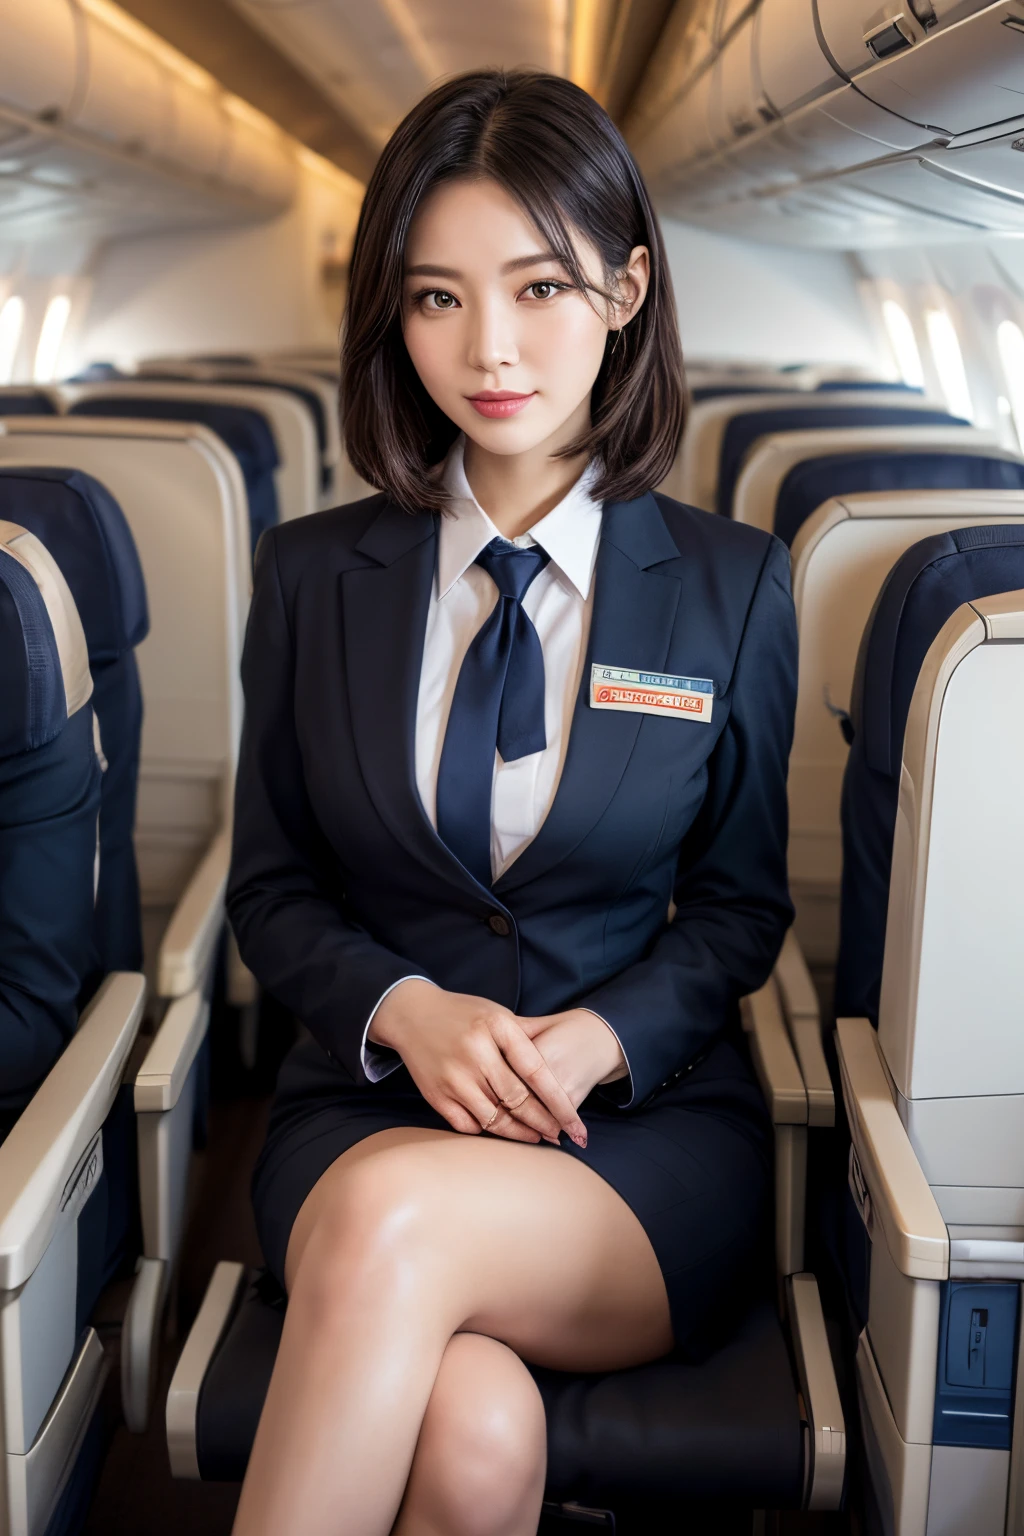 1 woman, 20 years、African Woman, hyperdetailed face、Detailed lips、A detailed eye、double eyelid、(Black bob hair、Like an airplane stewardess々Do a good job)、(Stewardess uniform:1.2)、(Glamorous body)、Smile、thighs thighs thighs thighs, Perfect fit, Perfect image realism, Background with: (Business Class aisle on airplanes:1.2), Cowboy Shot, Meticulous background, detailed costume, Perfect Lighting、Hyper-Realism、(Photorealistic:1.4)、8K maximum resolution, (​masterpiece), Highly detailed, Professional